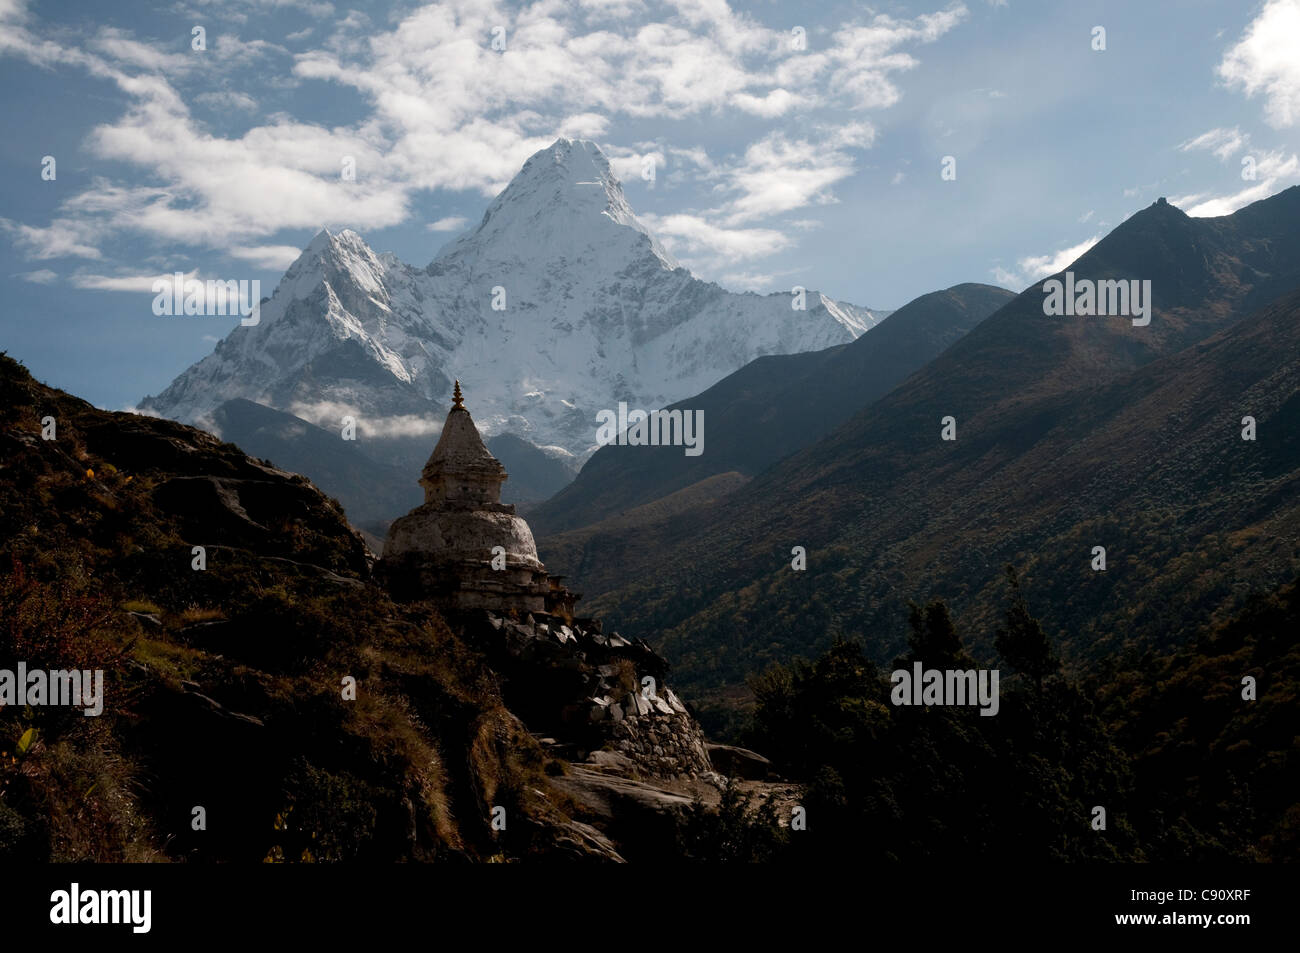 Ama Dablam is one of the huge sharp Himalayan peaks that rise above the route to Everest Base Camp through the valleys of the Stock Photo